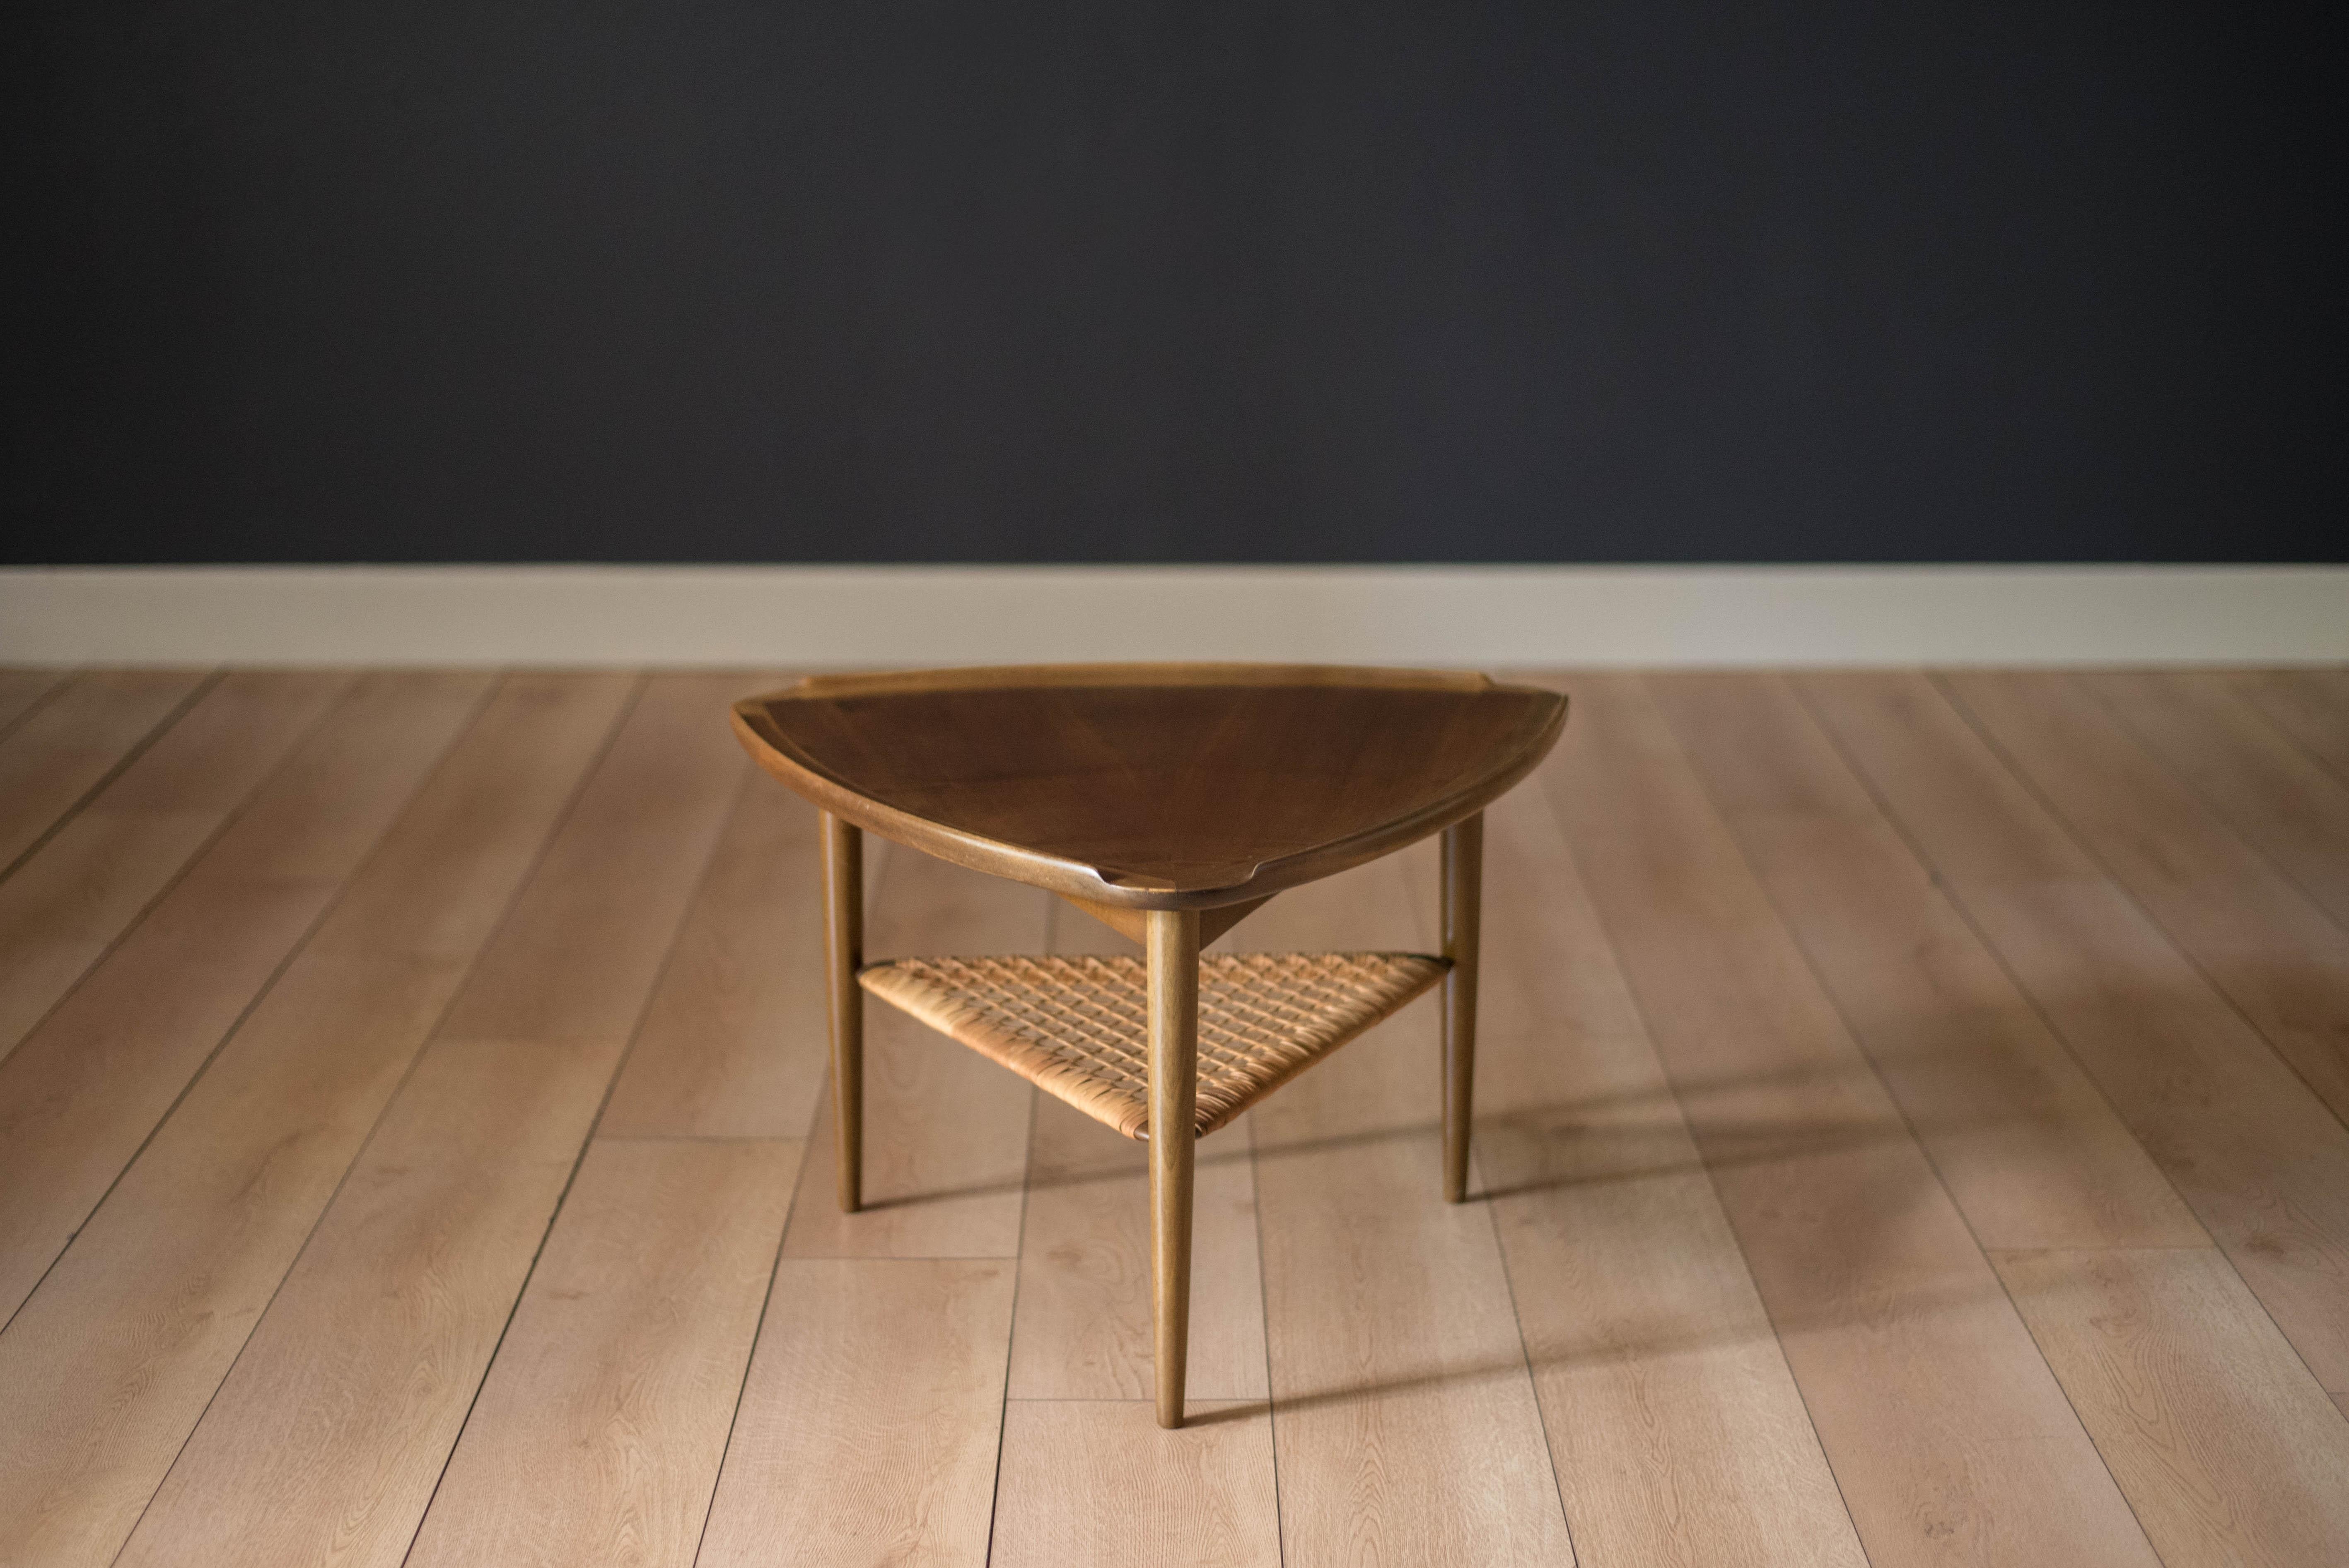 Mid Century triangular occasional table or guitar pick side table designed by Poul Jensen imported by Selig, Denmark. This piece features a unique walnut raised edge top and lower tier magazine shelf made of woven cane.



Offered by Mid Century